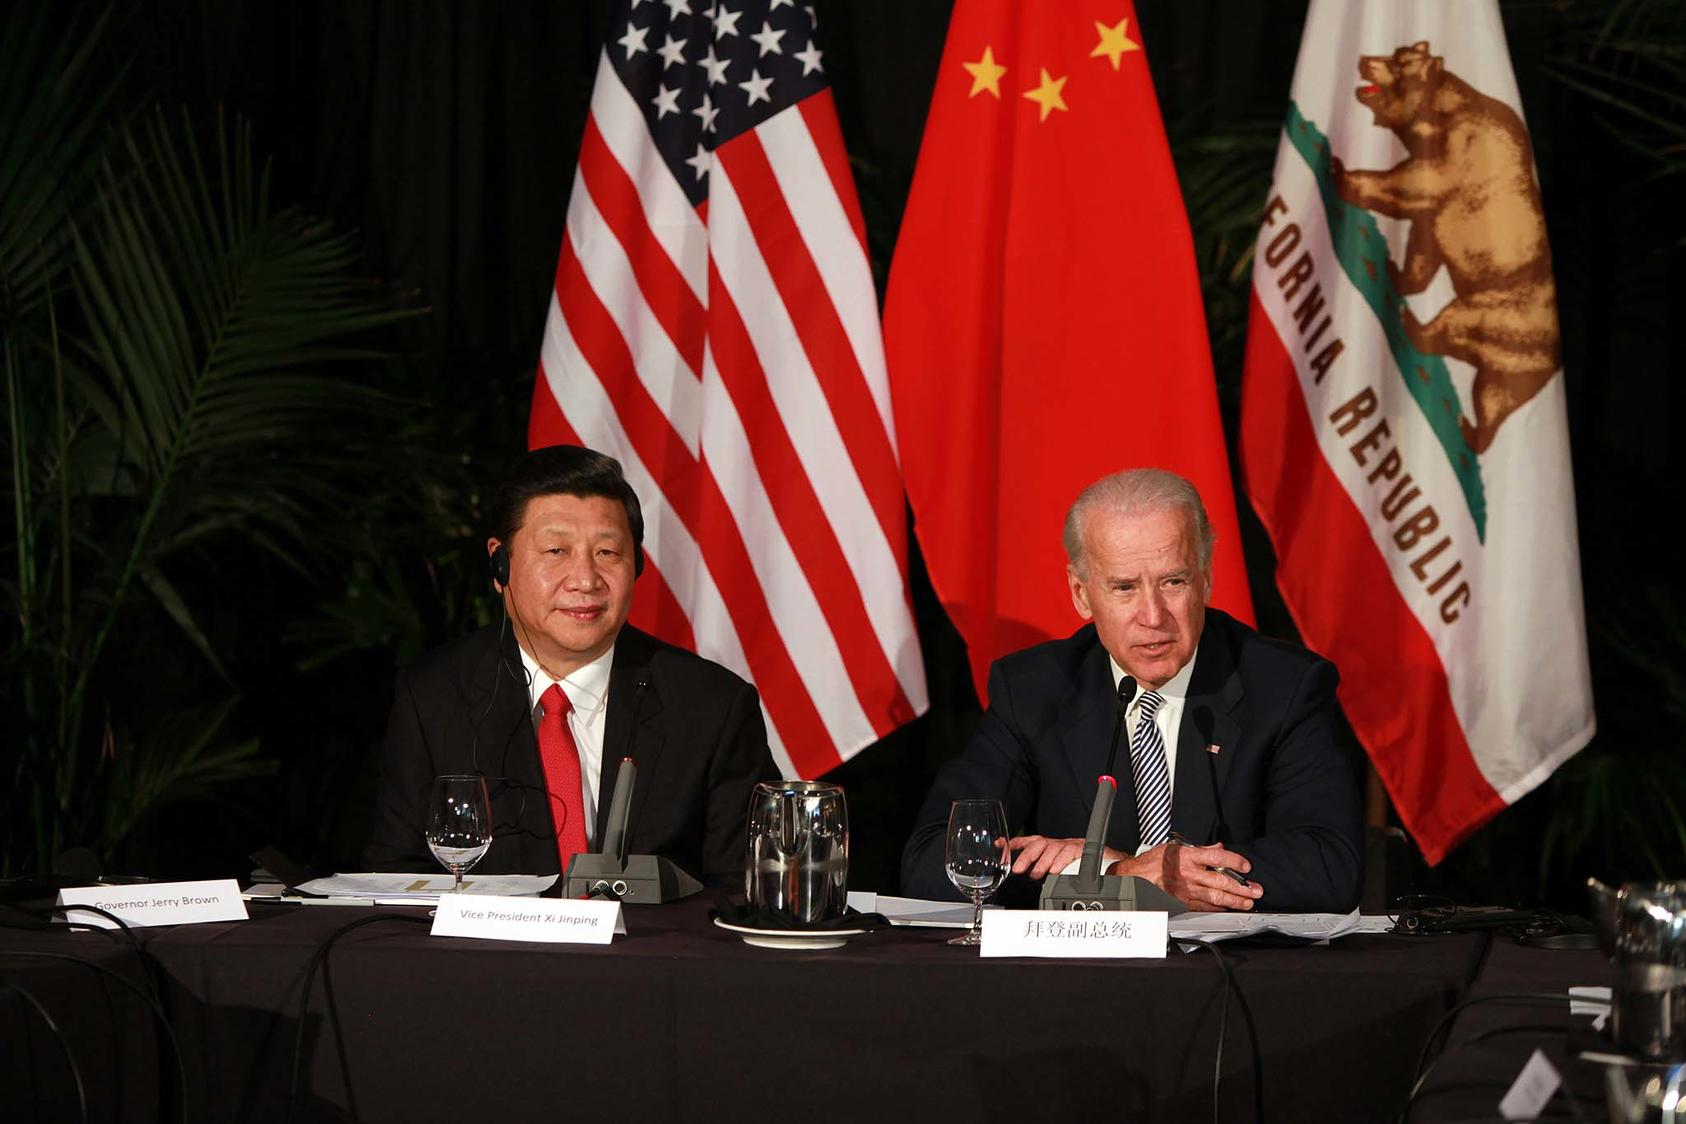 Xi Jinping, then China's vice president and leader-in-waiting, and then Vice President Joe Biden during a governor's forum in Los Angeles, California, Feb. 17, 2012. (Monica Almeida/The New York Times)